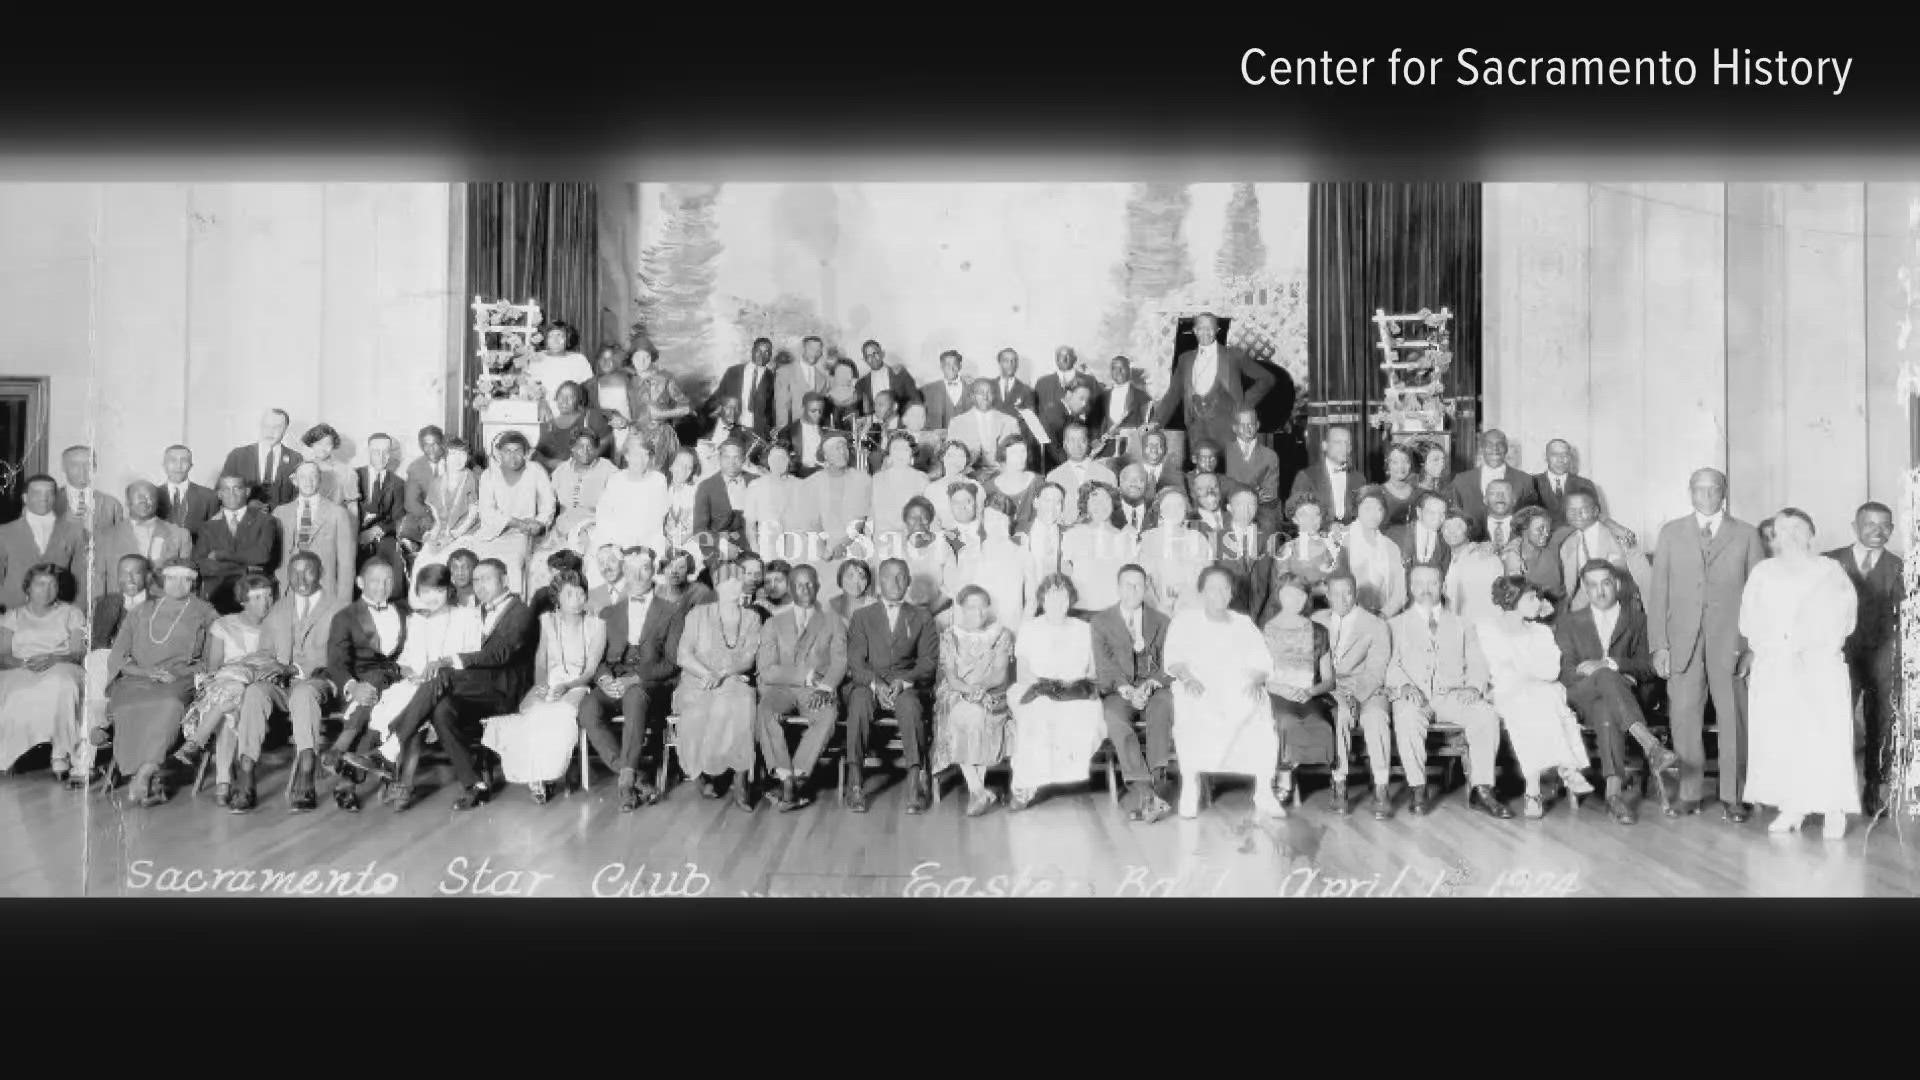 The “African American Experience Project” is collecting oral histories, documents and pictures to capture and share Black history in Sacramento.